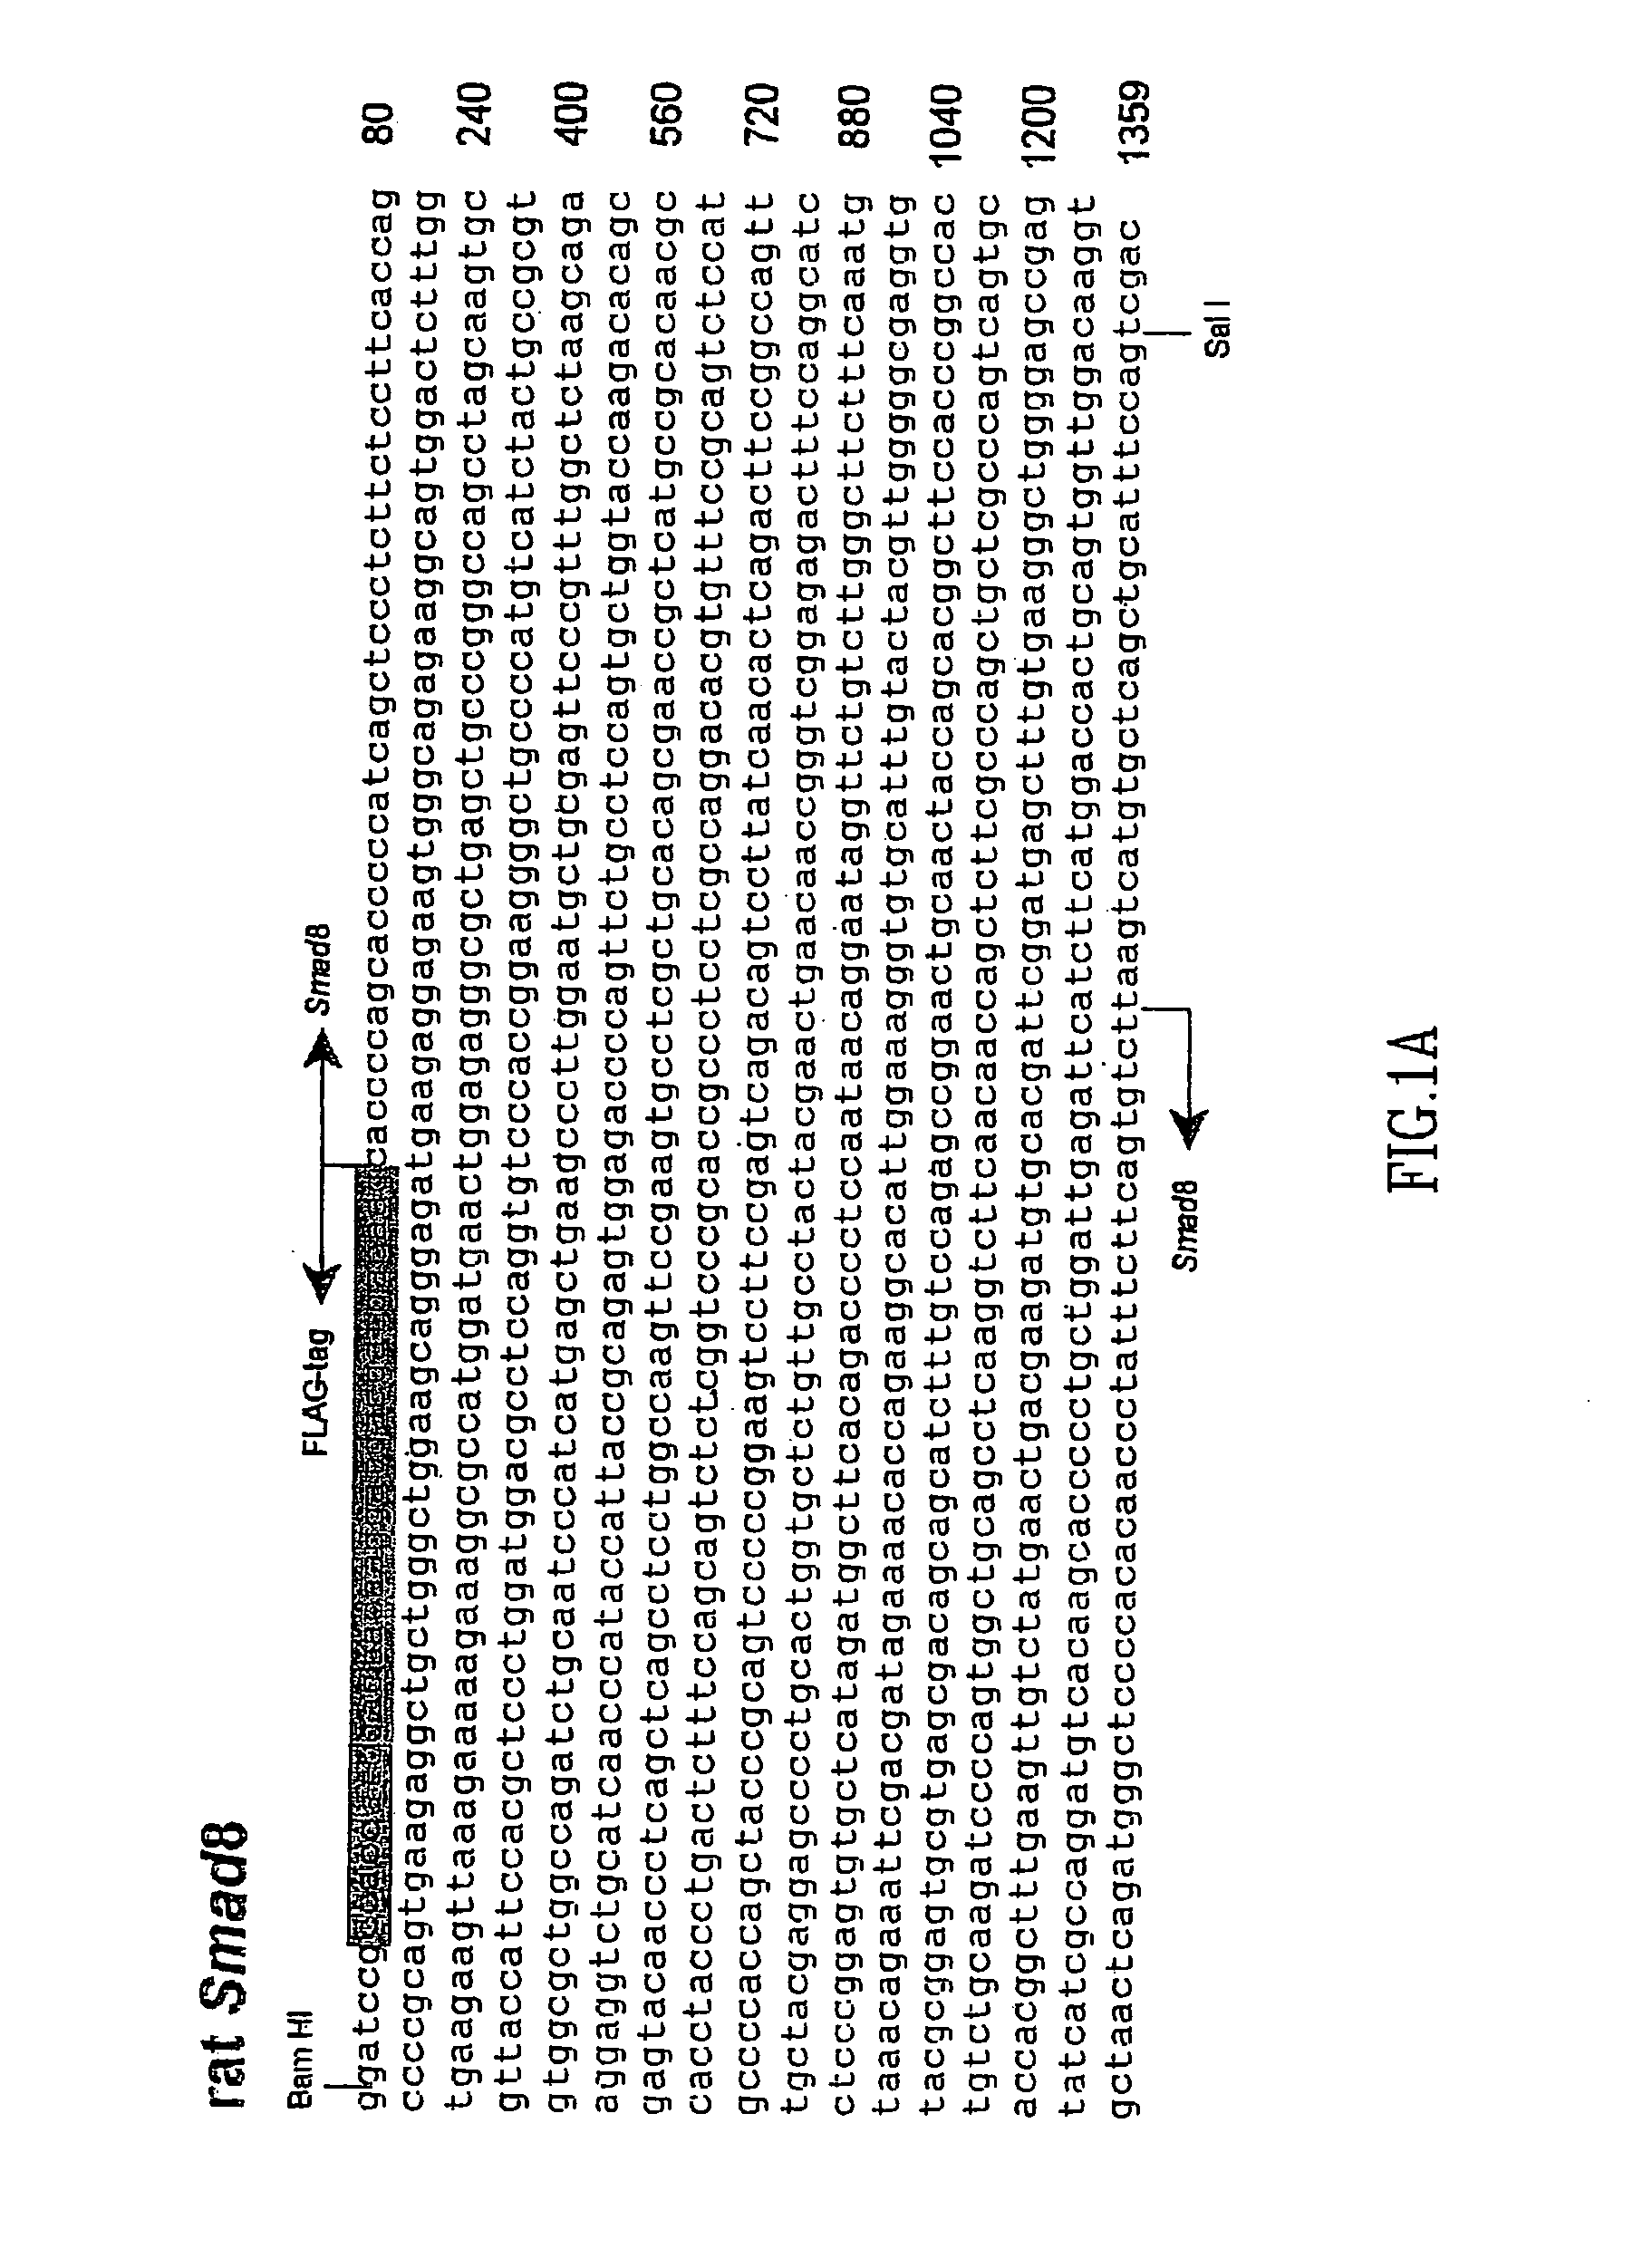 Methods of inducing or enhancing connective tissue repair